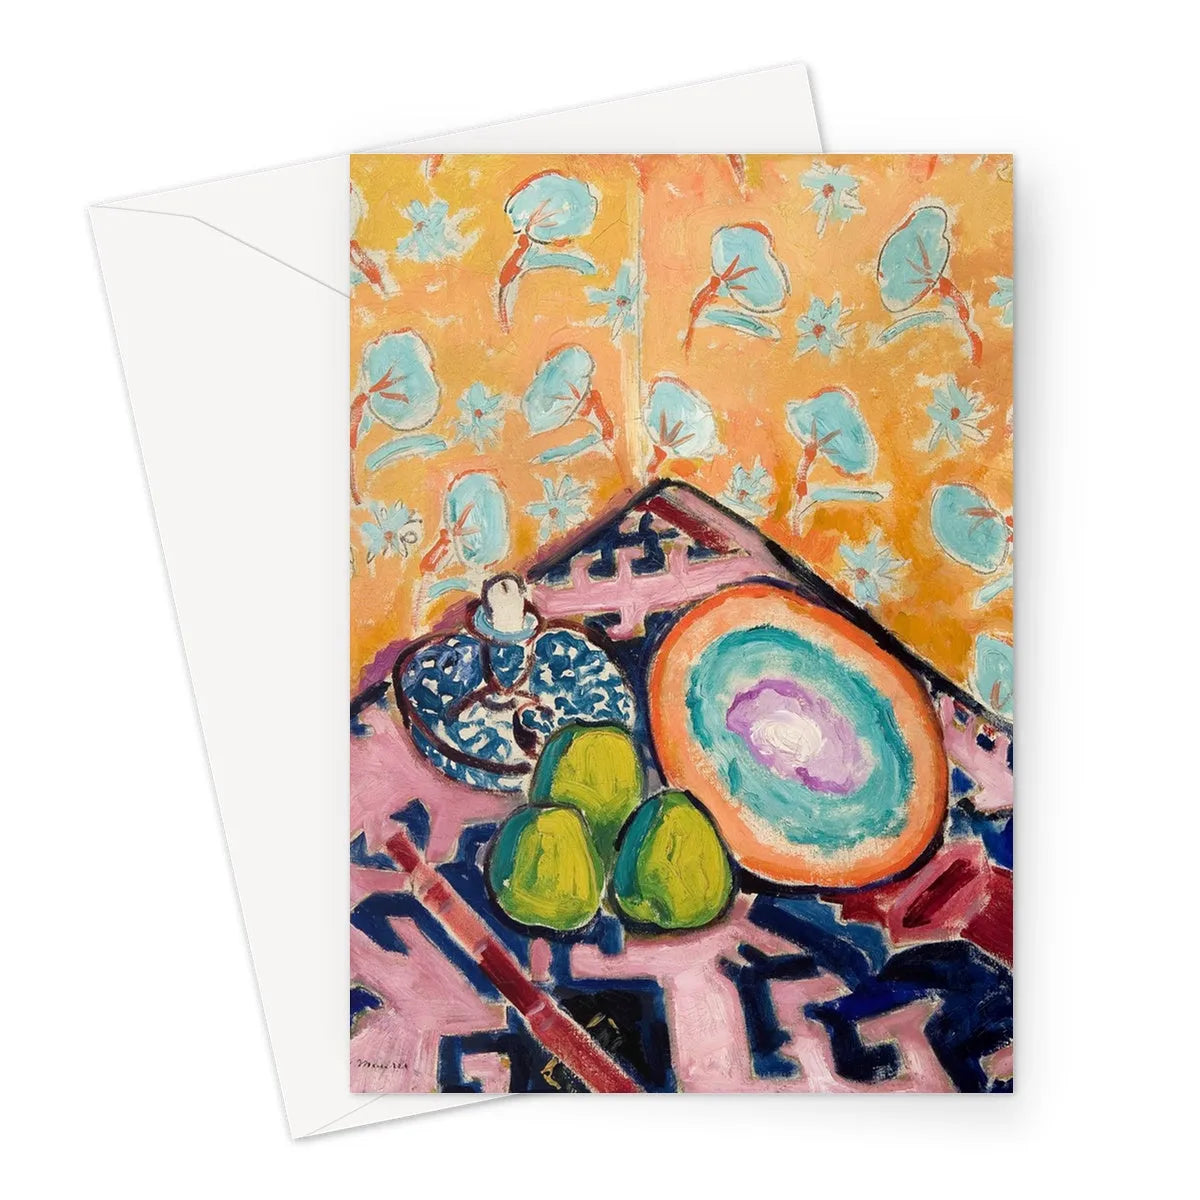 Still Life By Alfred Henry Maurer Greeting Card - A5 Portrait / 1 Card - Greeting & Note Cards - Aesthetic Art